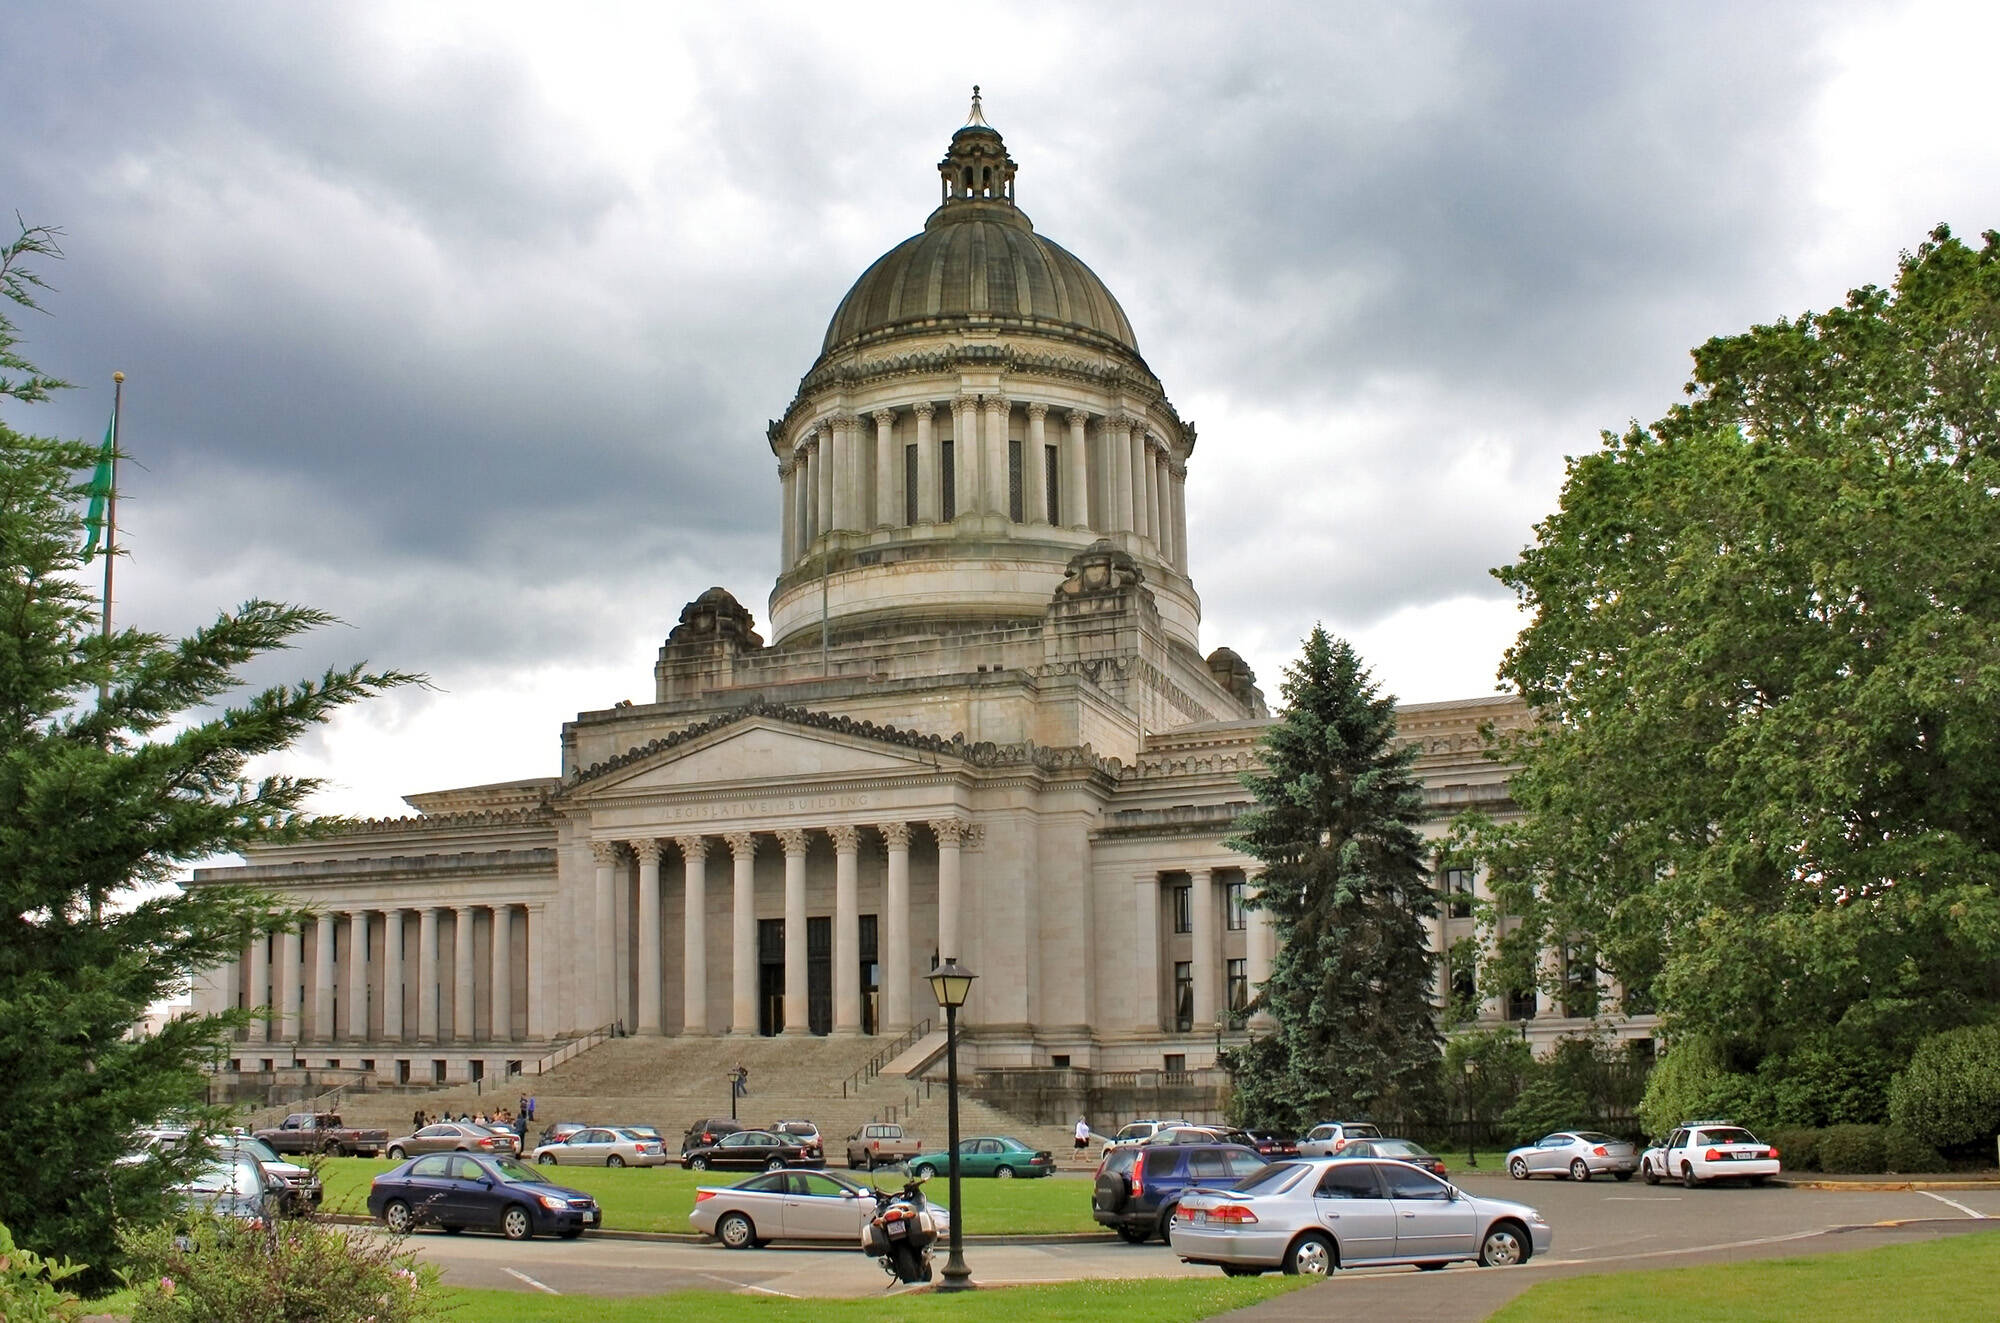 The Washington state Capitol building in Olympia. Victoria Ditkovsky | Dreamstime | TNS